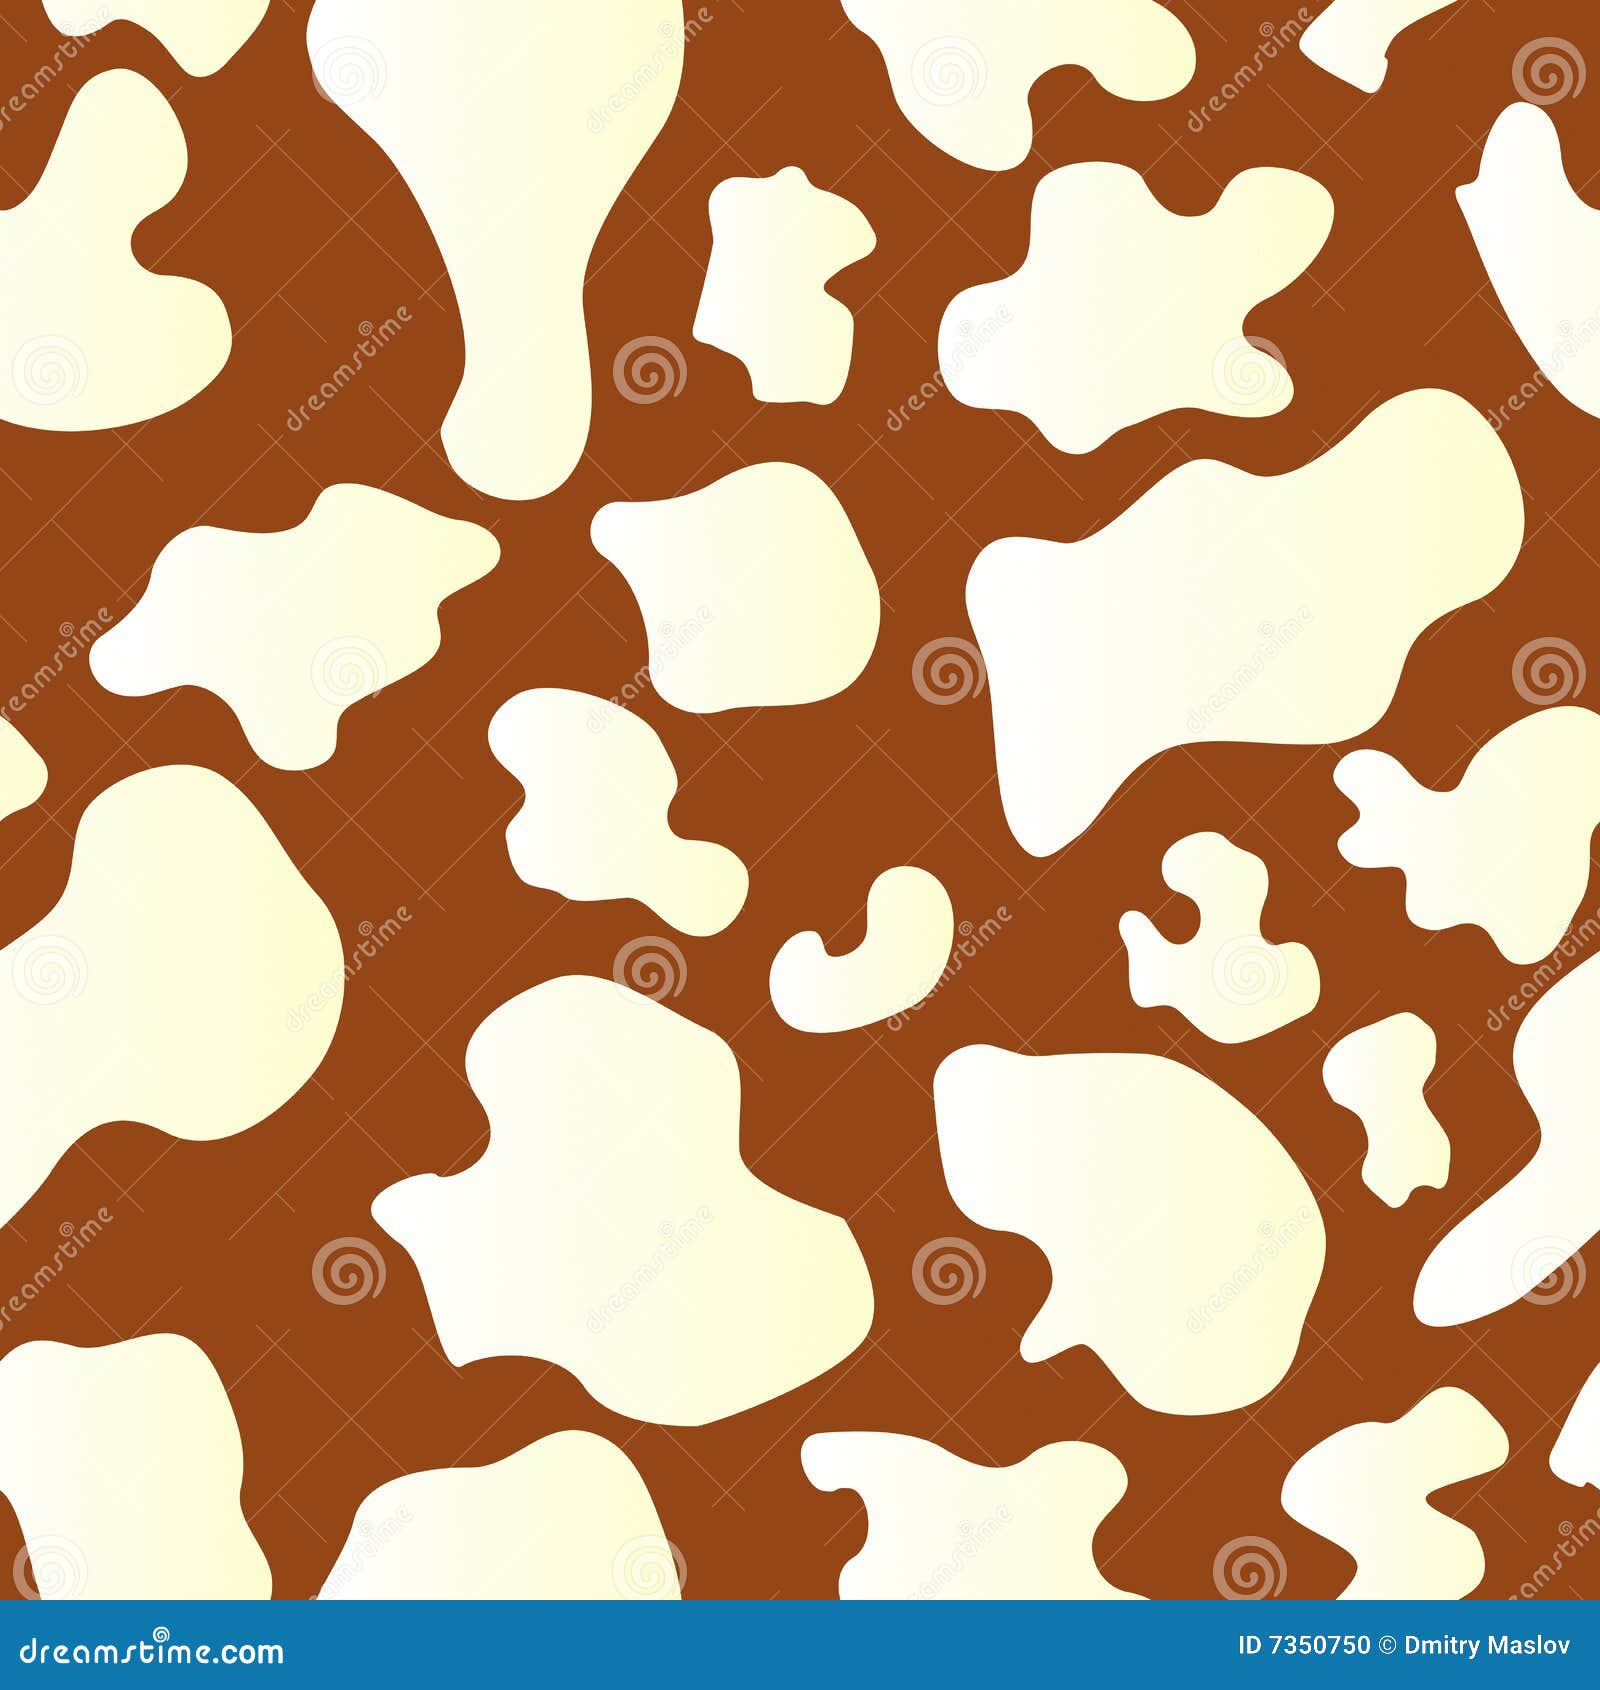 cow pattern clipart - photo #26